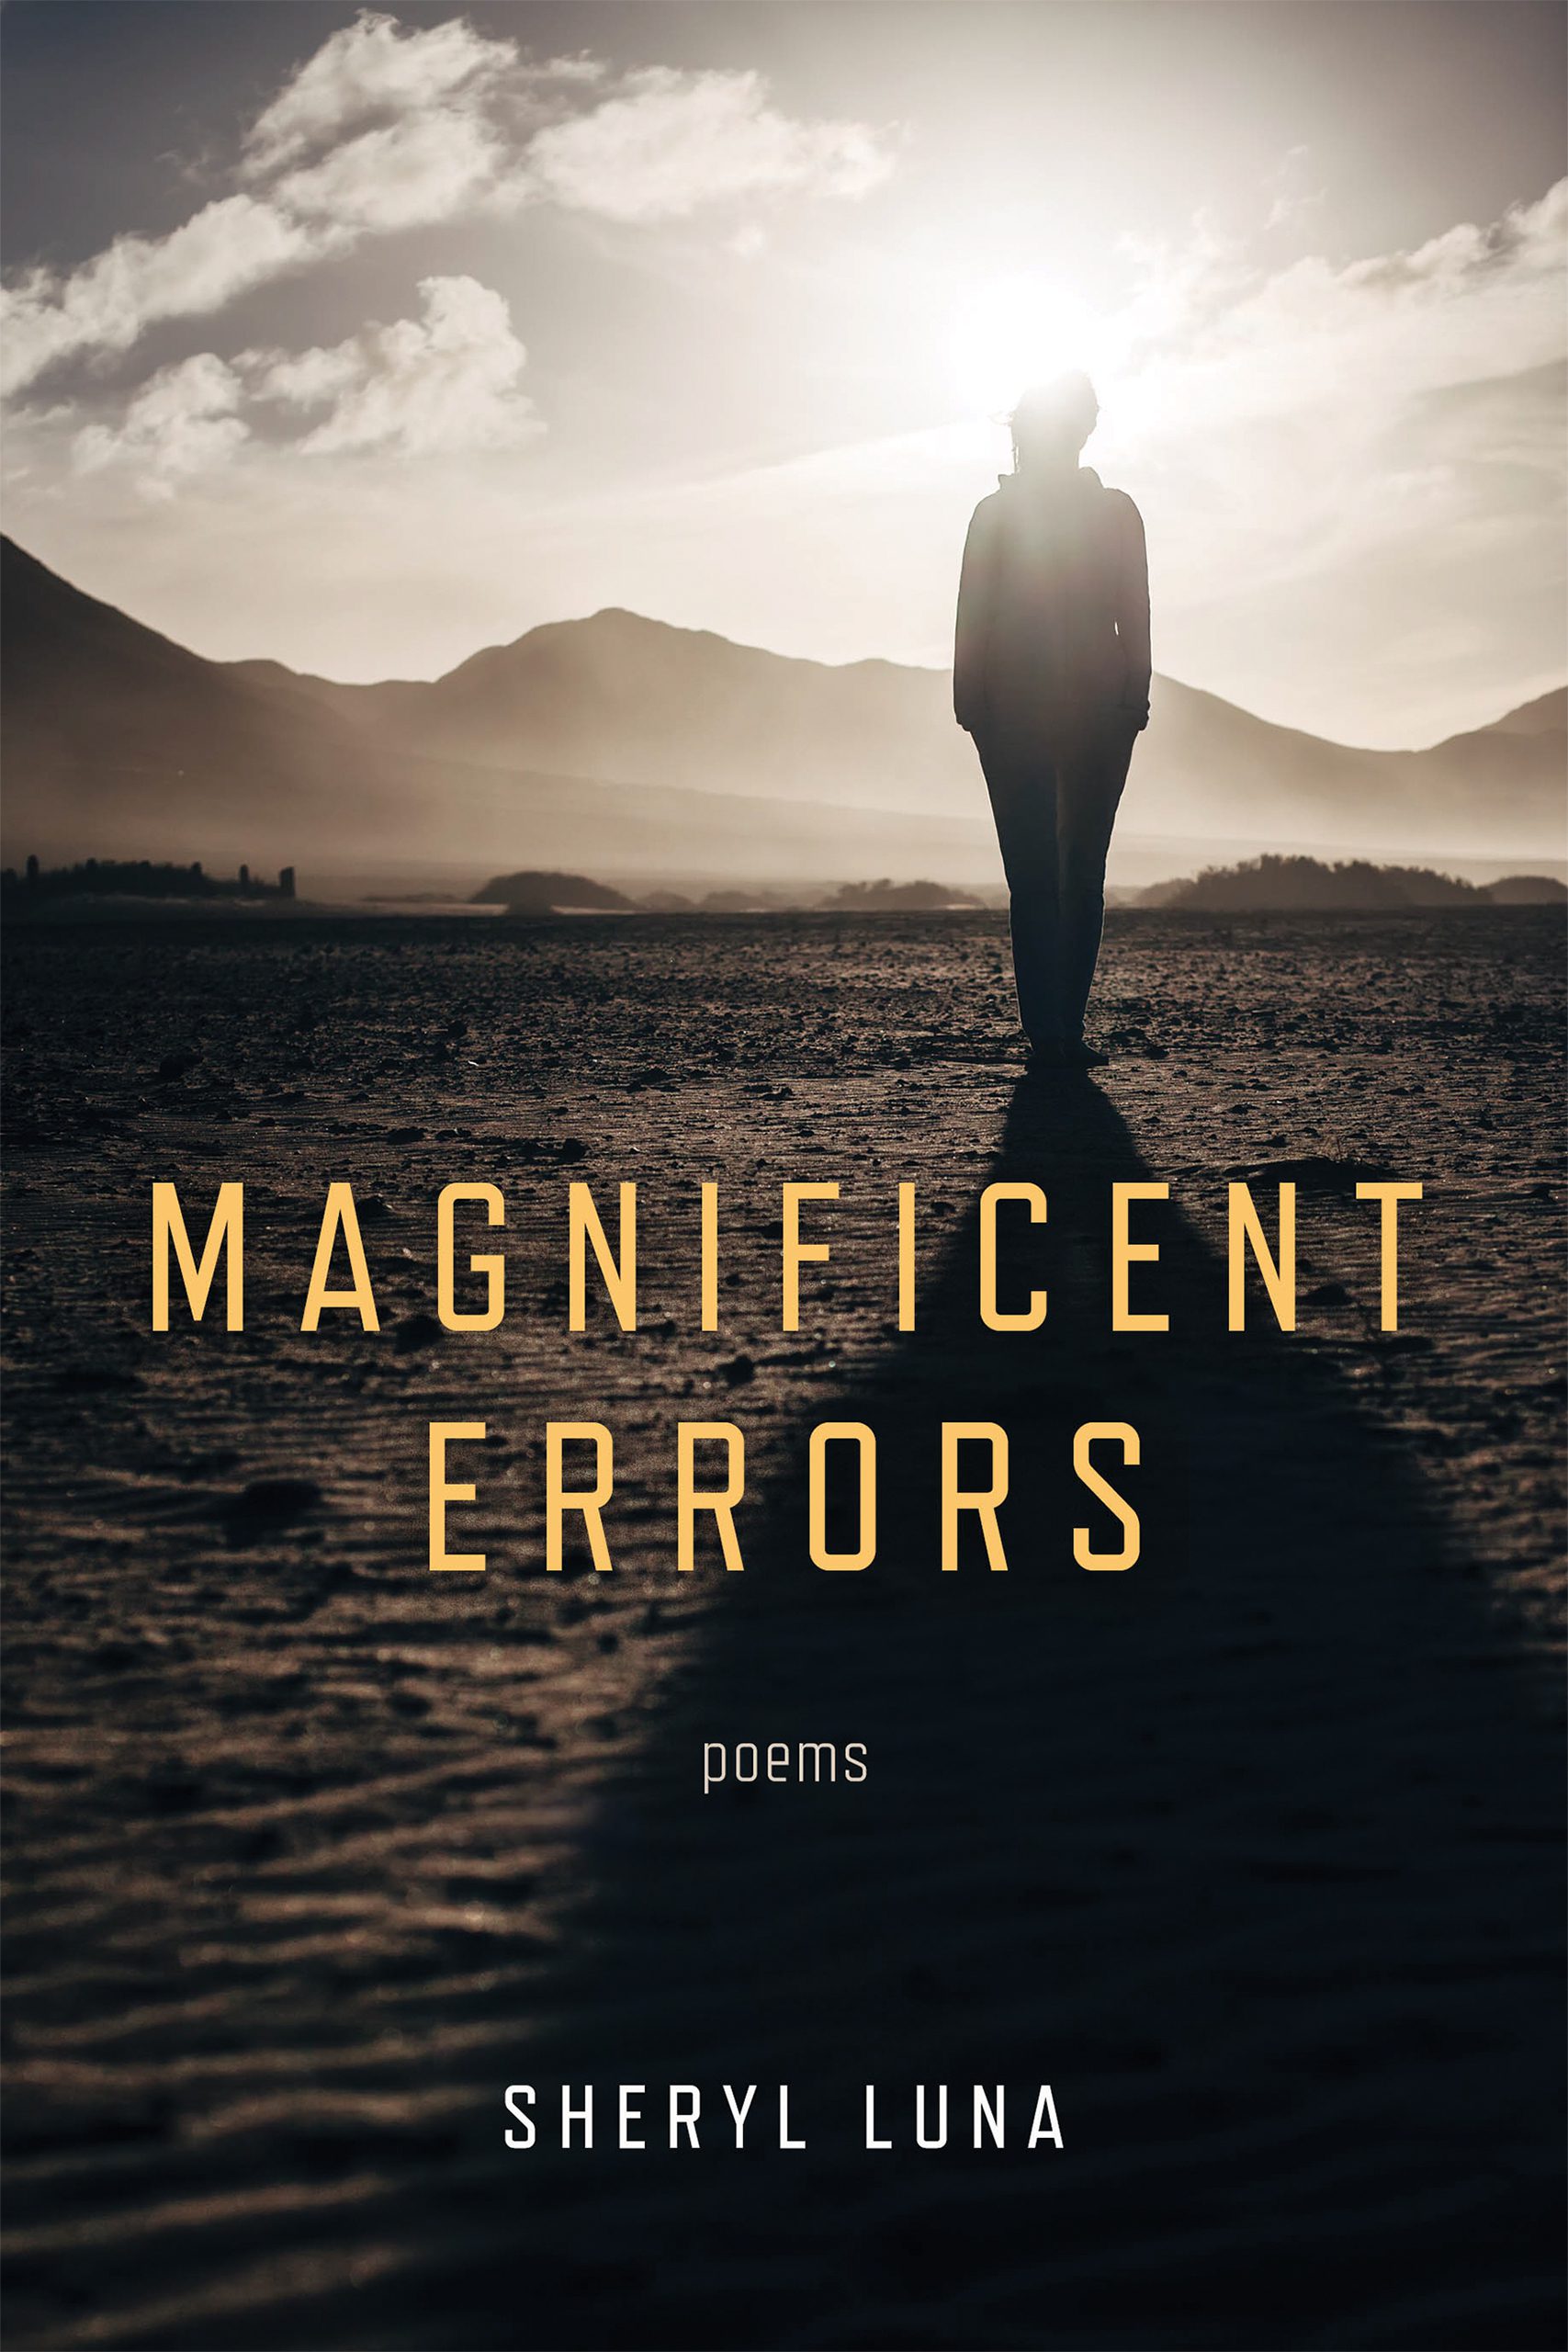 Virtual Book Launch: “Magnificent Errors” by Sheryl Luna